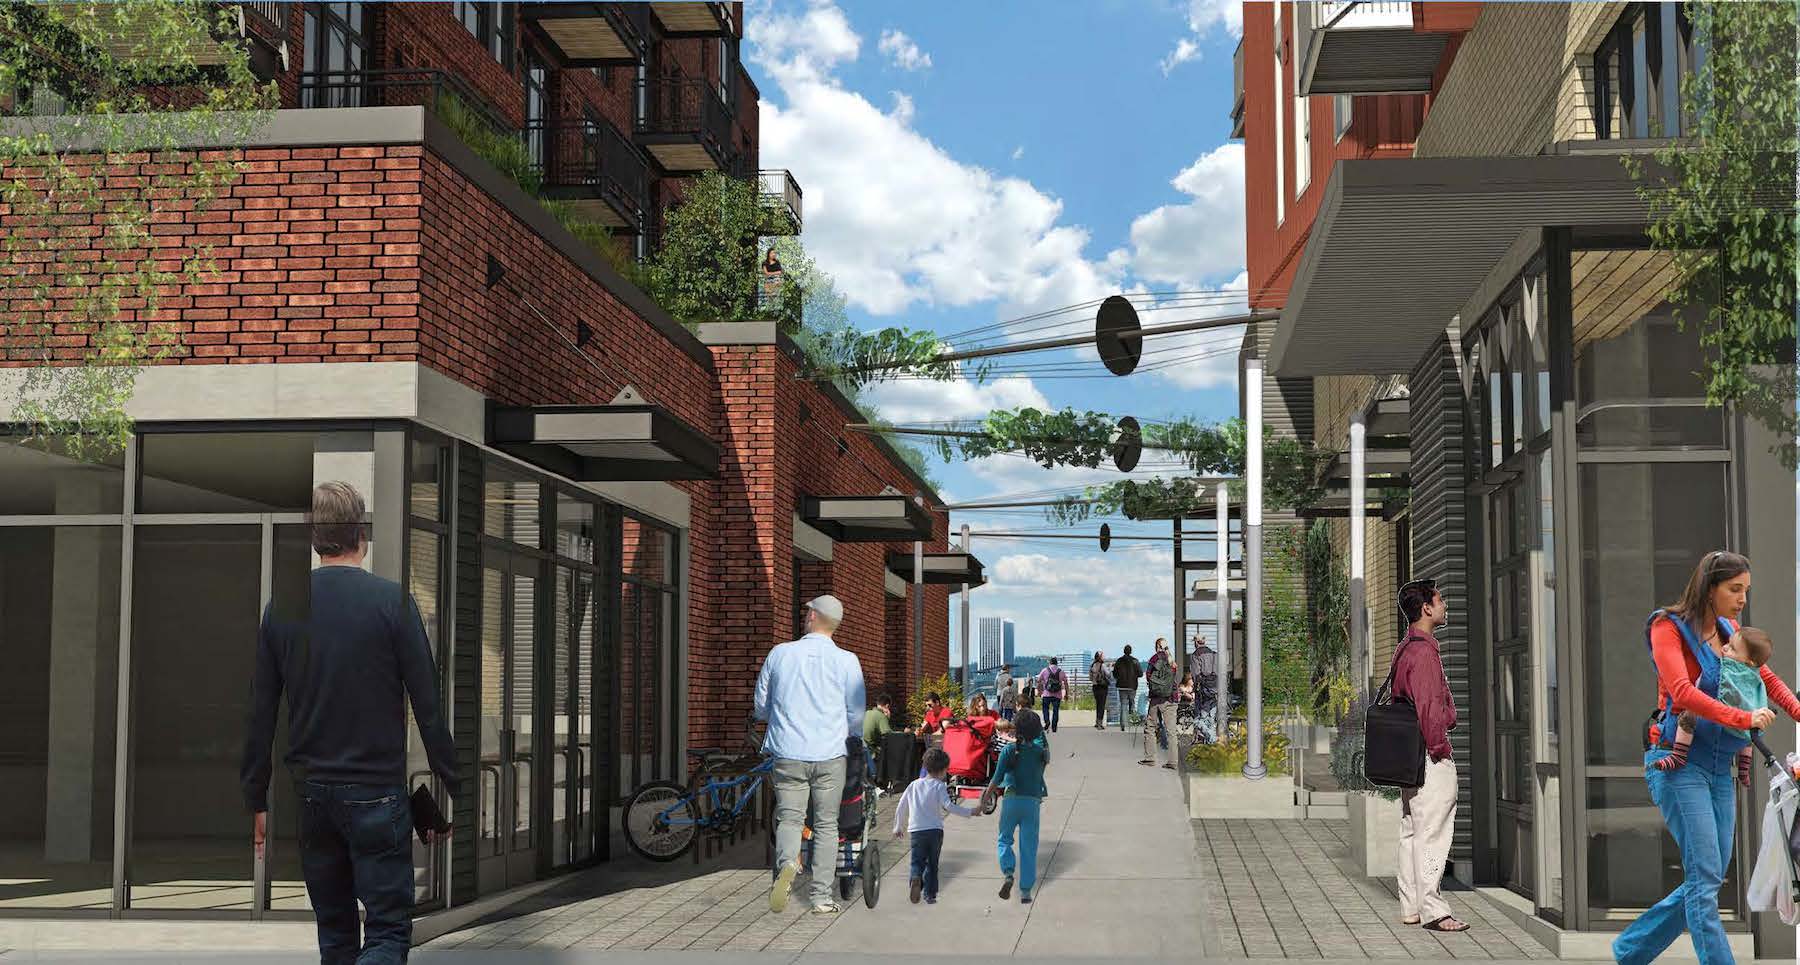 Two new retail tenants have been confirmed for the Goat Blocks development in SE Portland